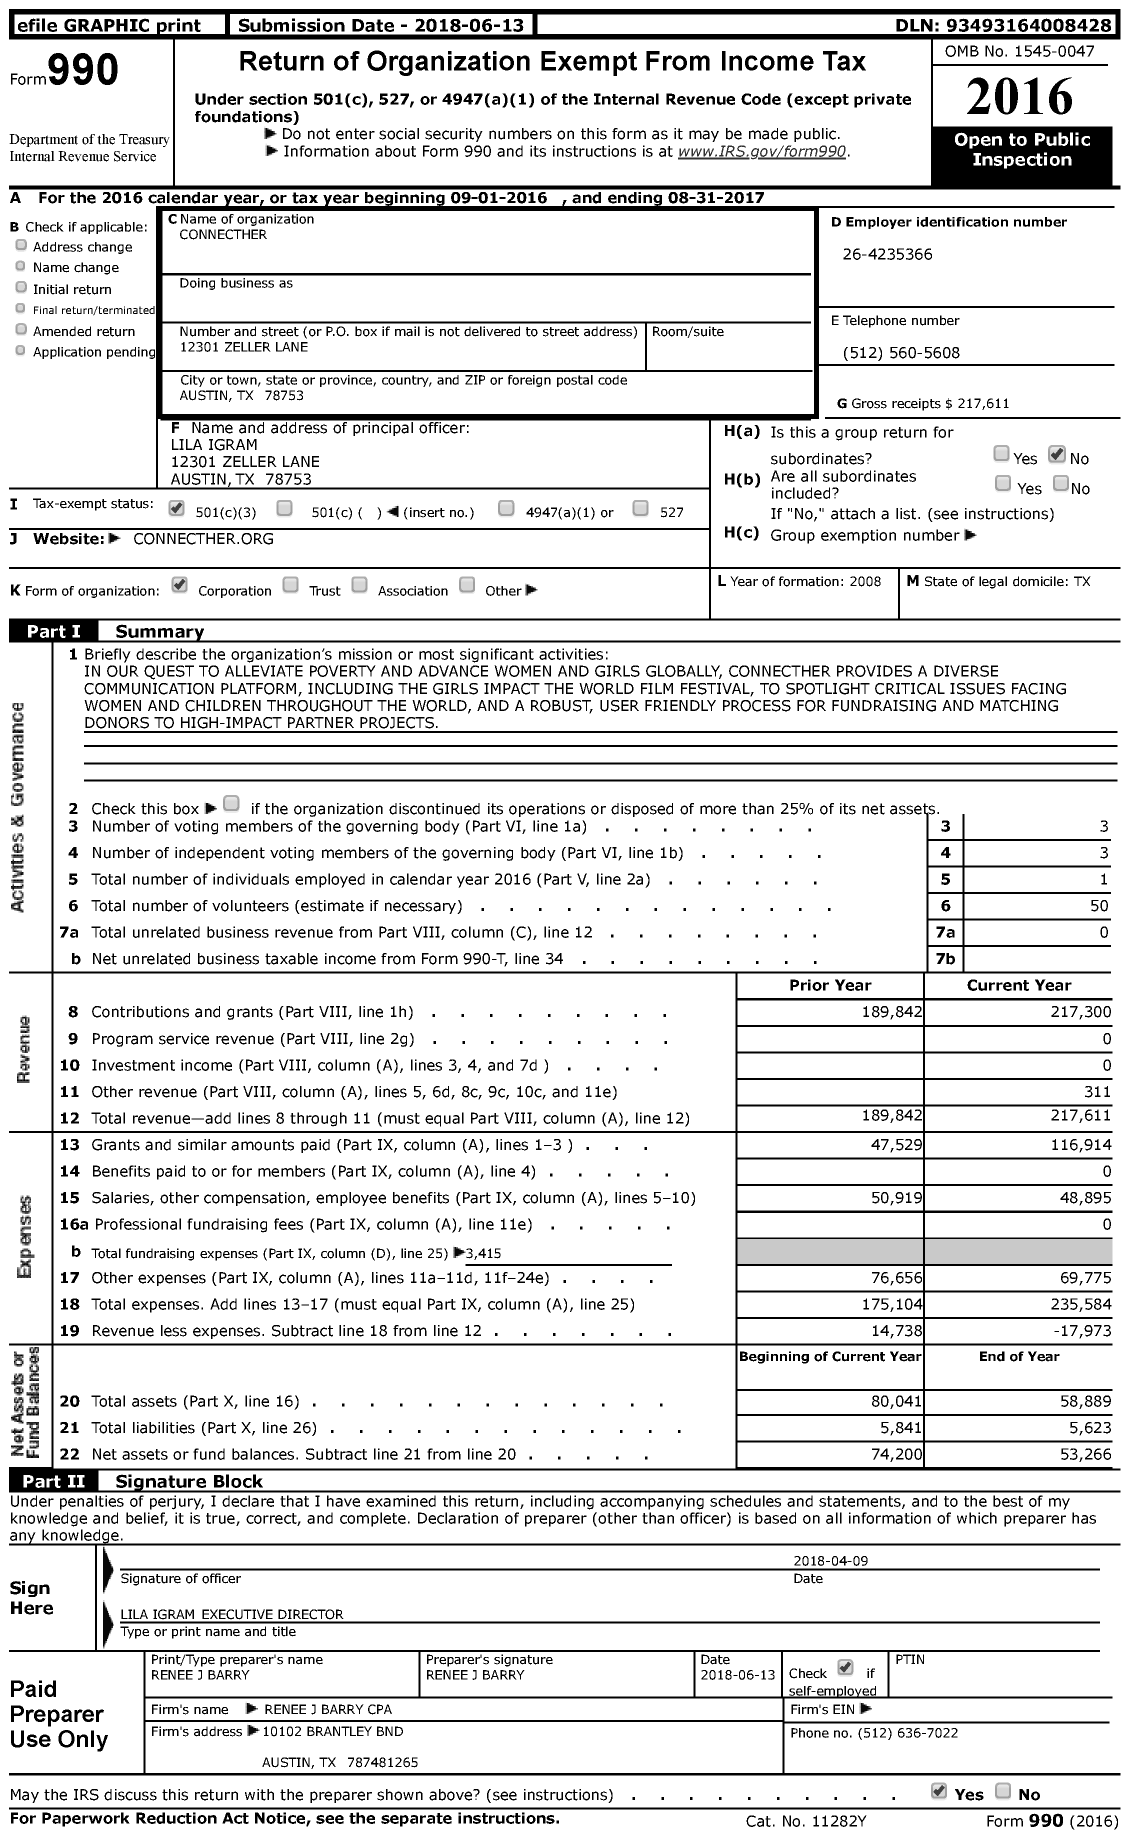 Image of first page of 2016 Form 990 for ConnectHER